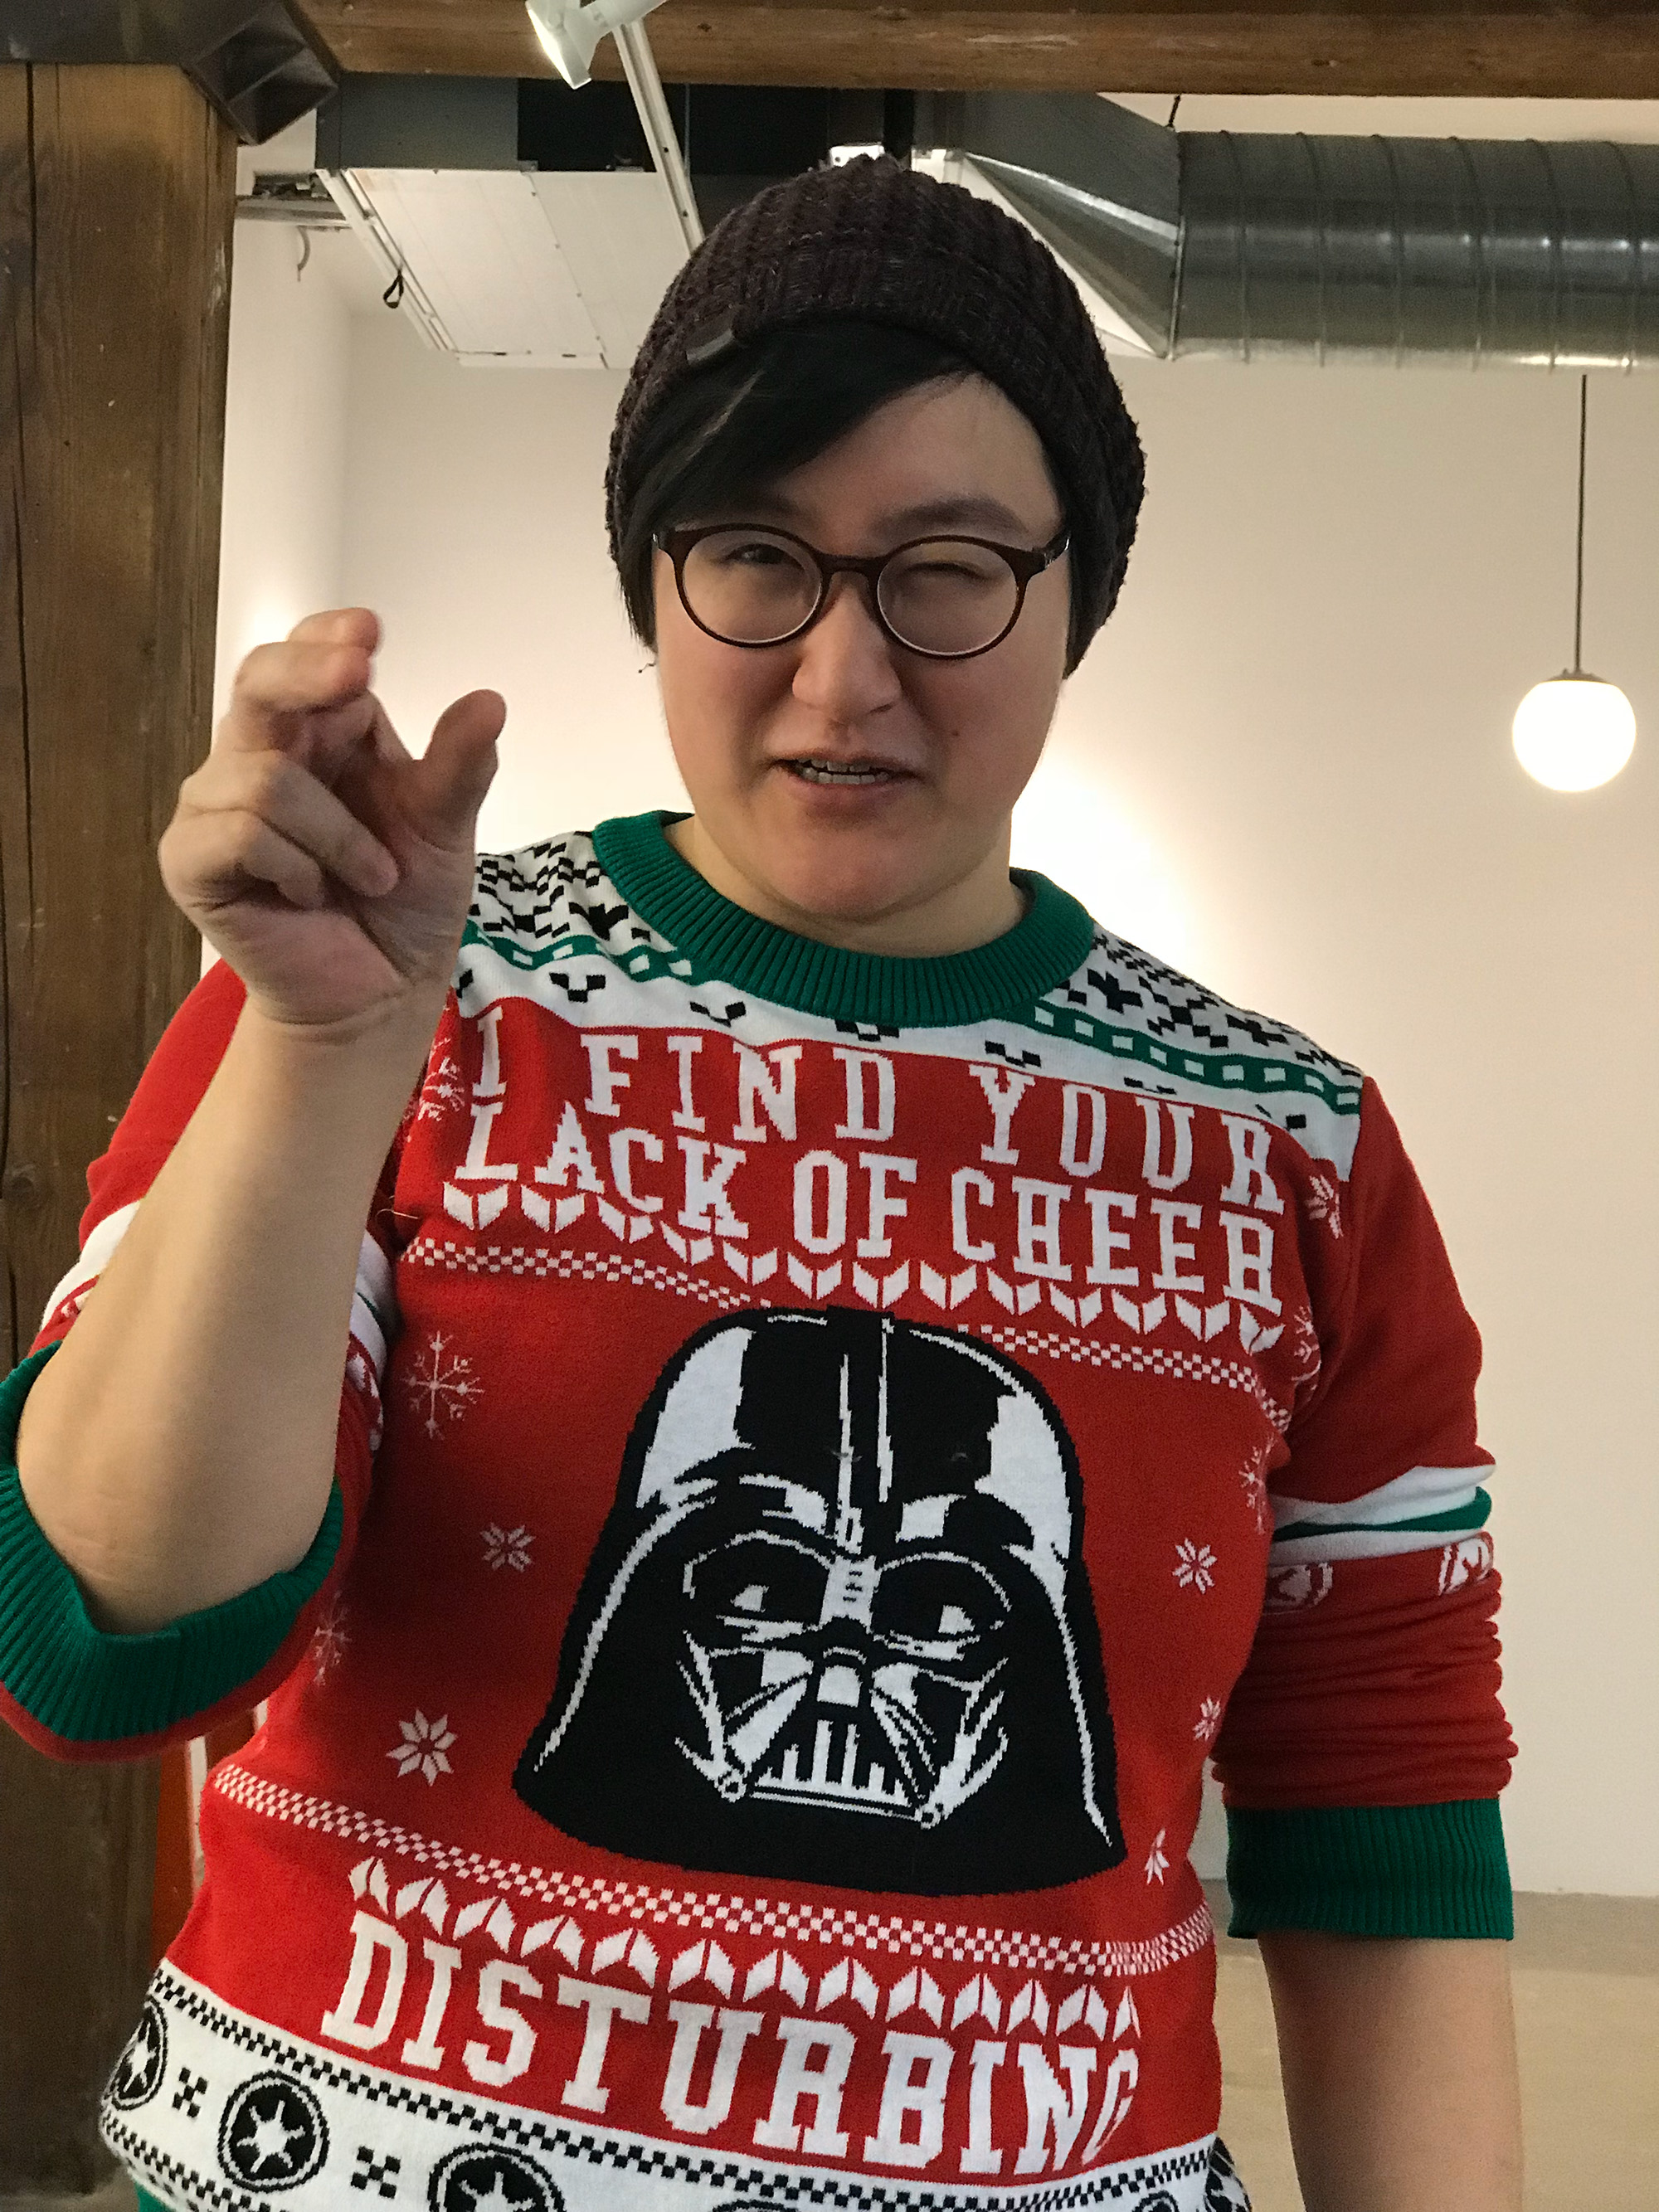 Me, trying to force choke with the power of my Star Wars ugly Xmas sweater